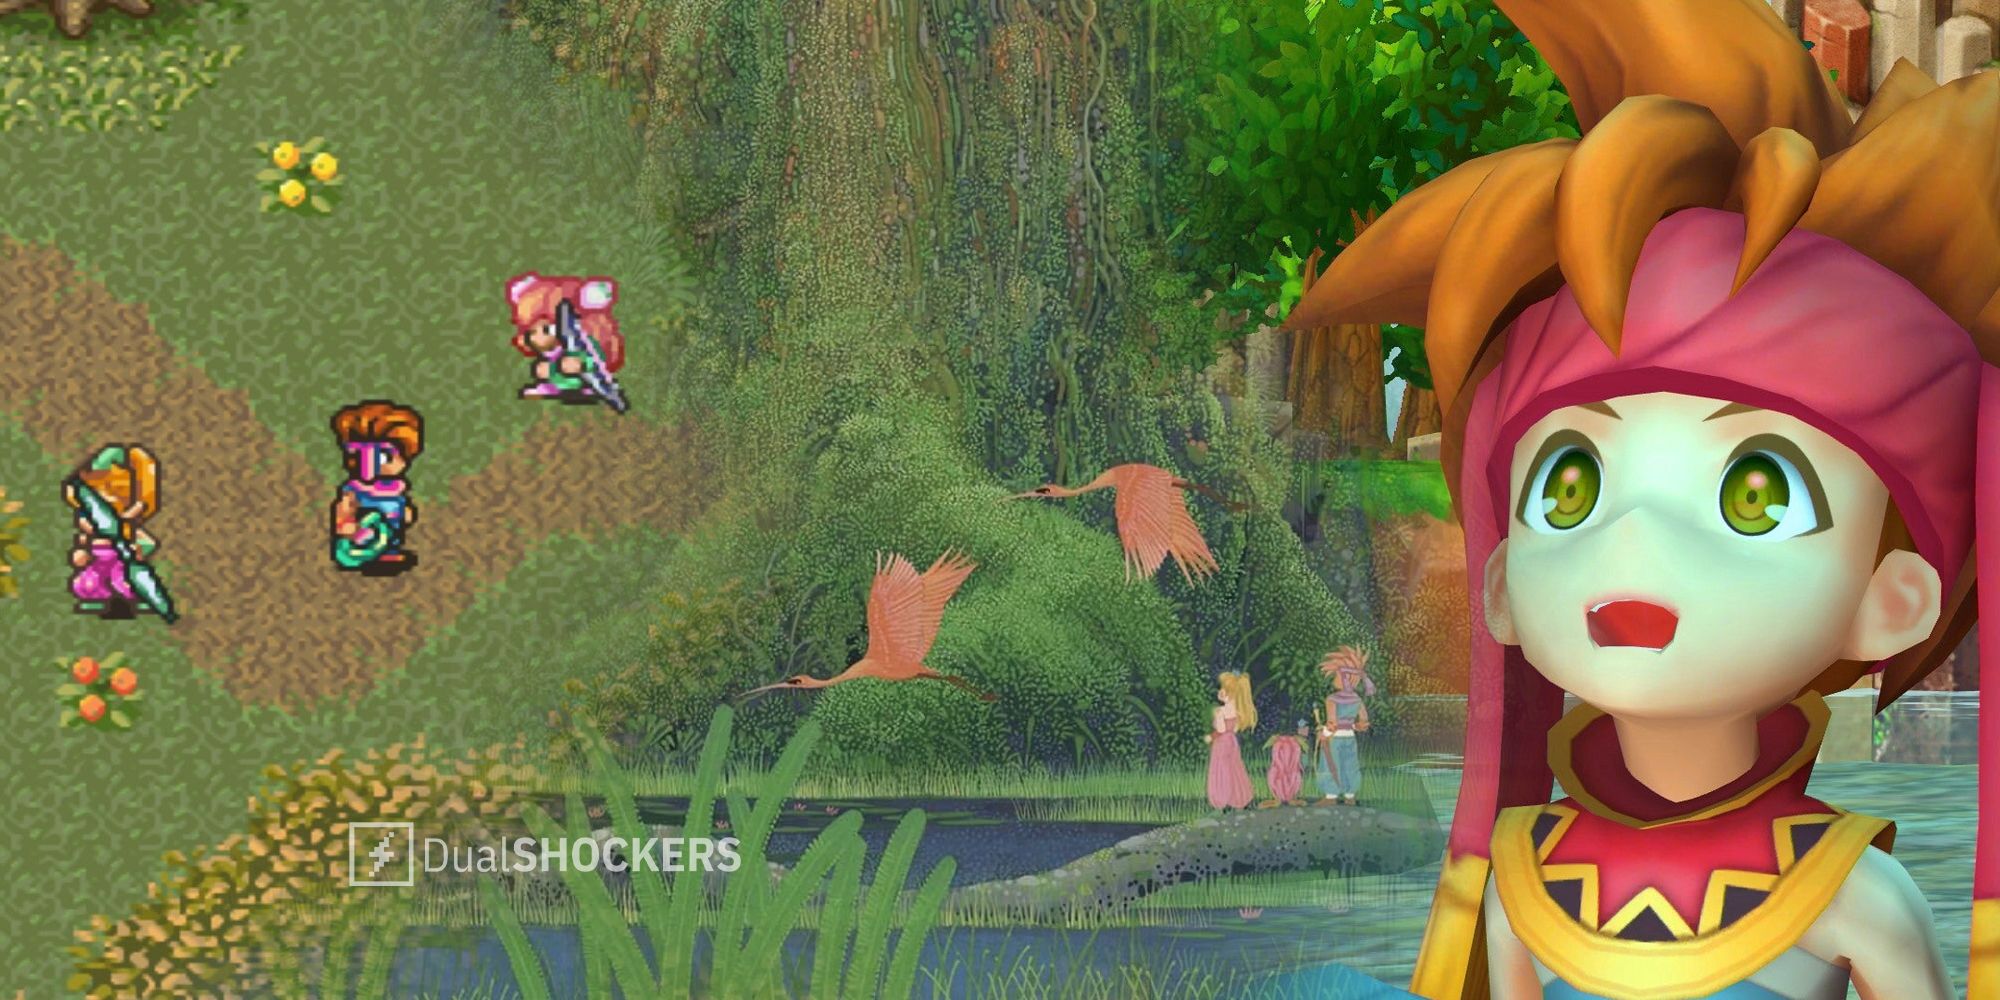 Secret Of Mana Remake PS4 and original SNES characters